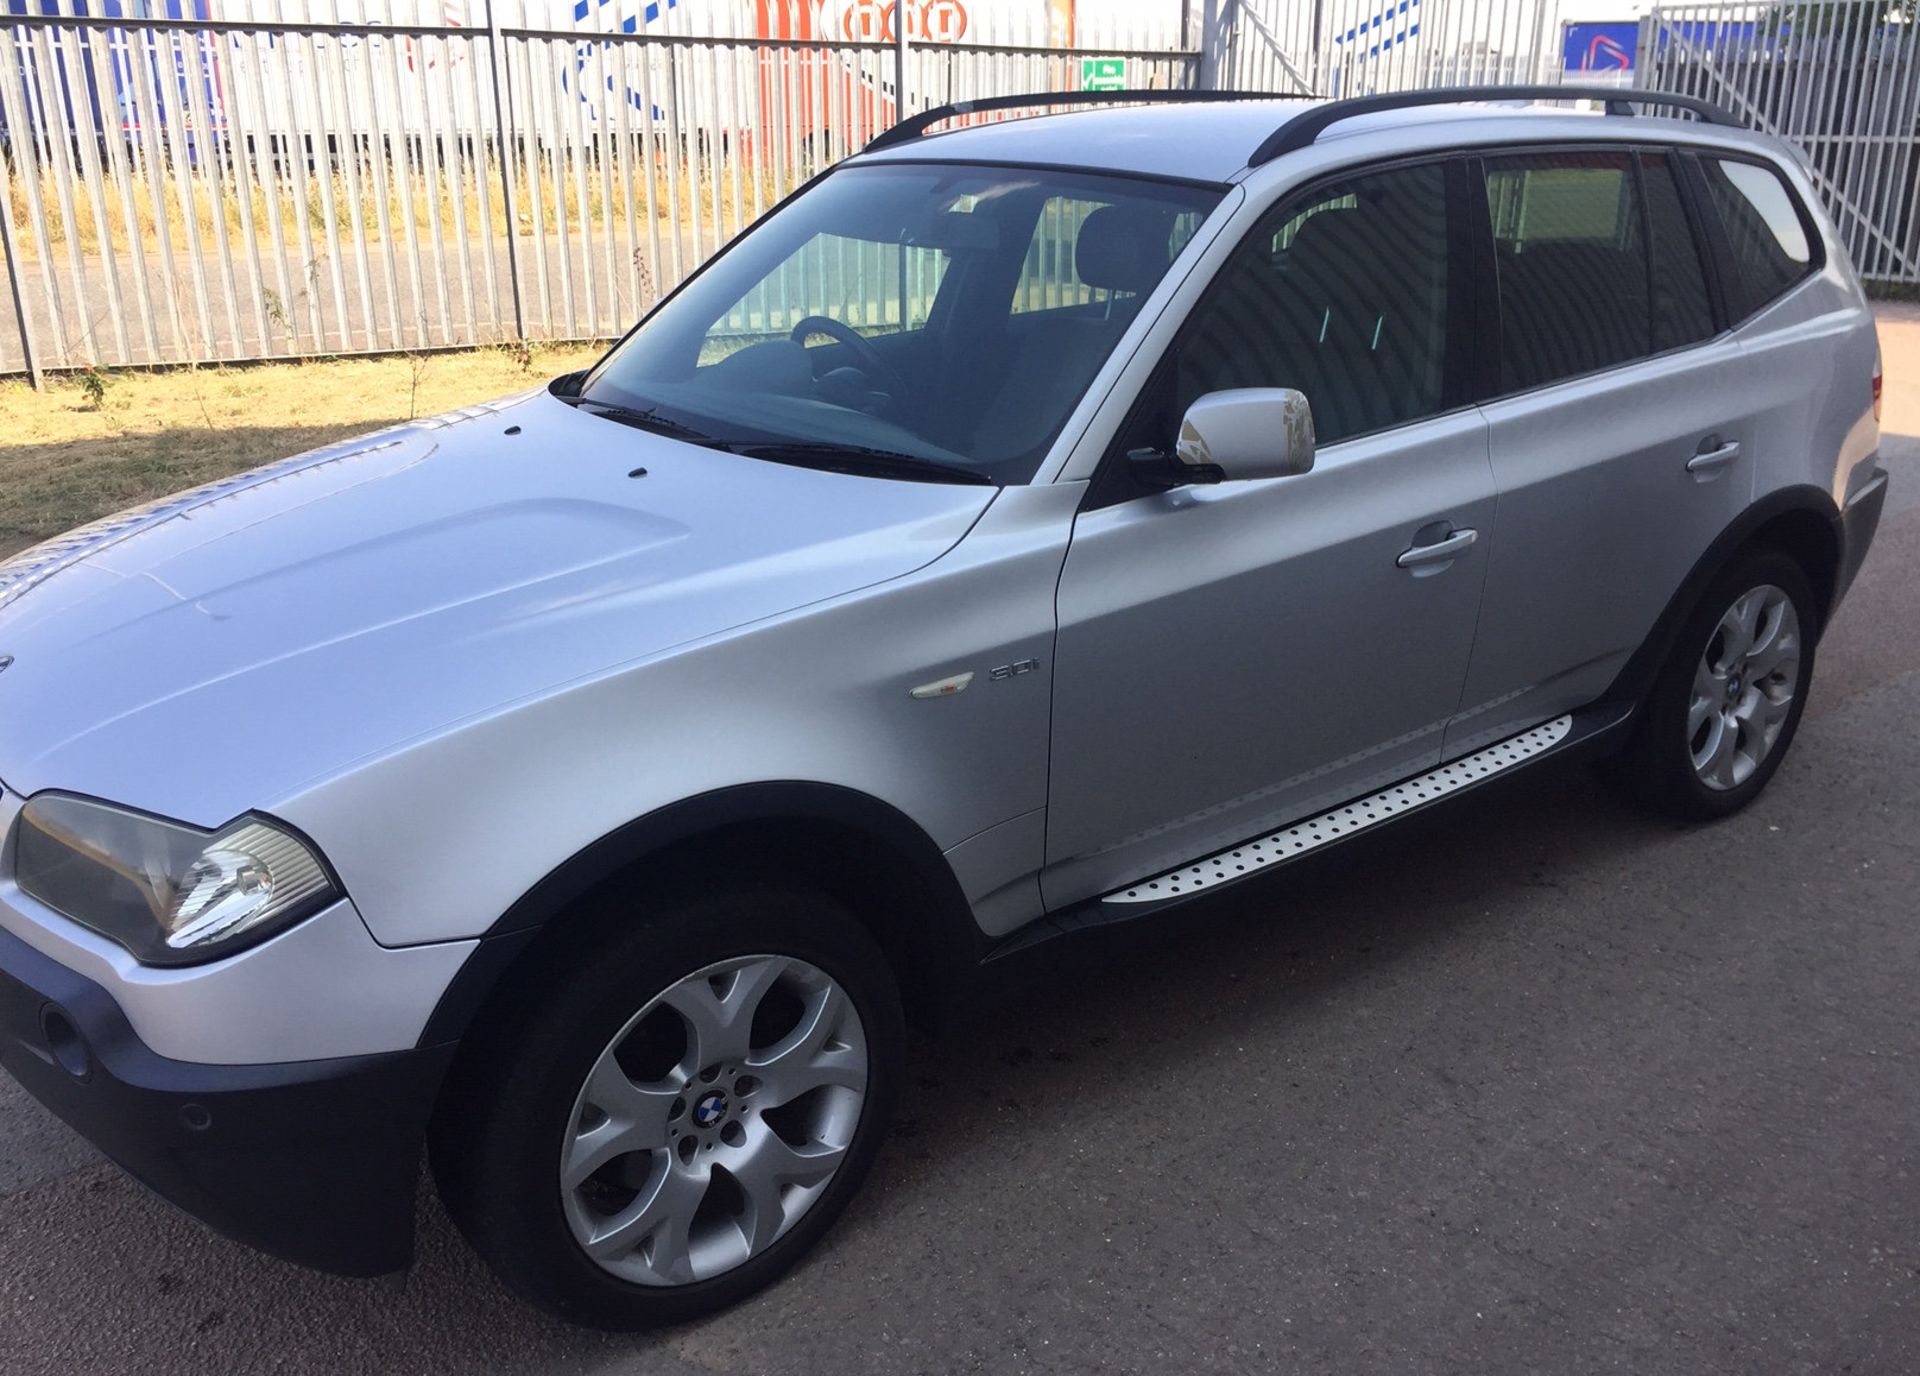 2005 BMW X3 3.0 Sport Auto 5 Dr 4x4 - CL505 - NO VAT ON THE HAMMER - Location: Corby, Northamptonshi - Image 6 of 16